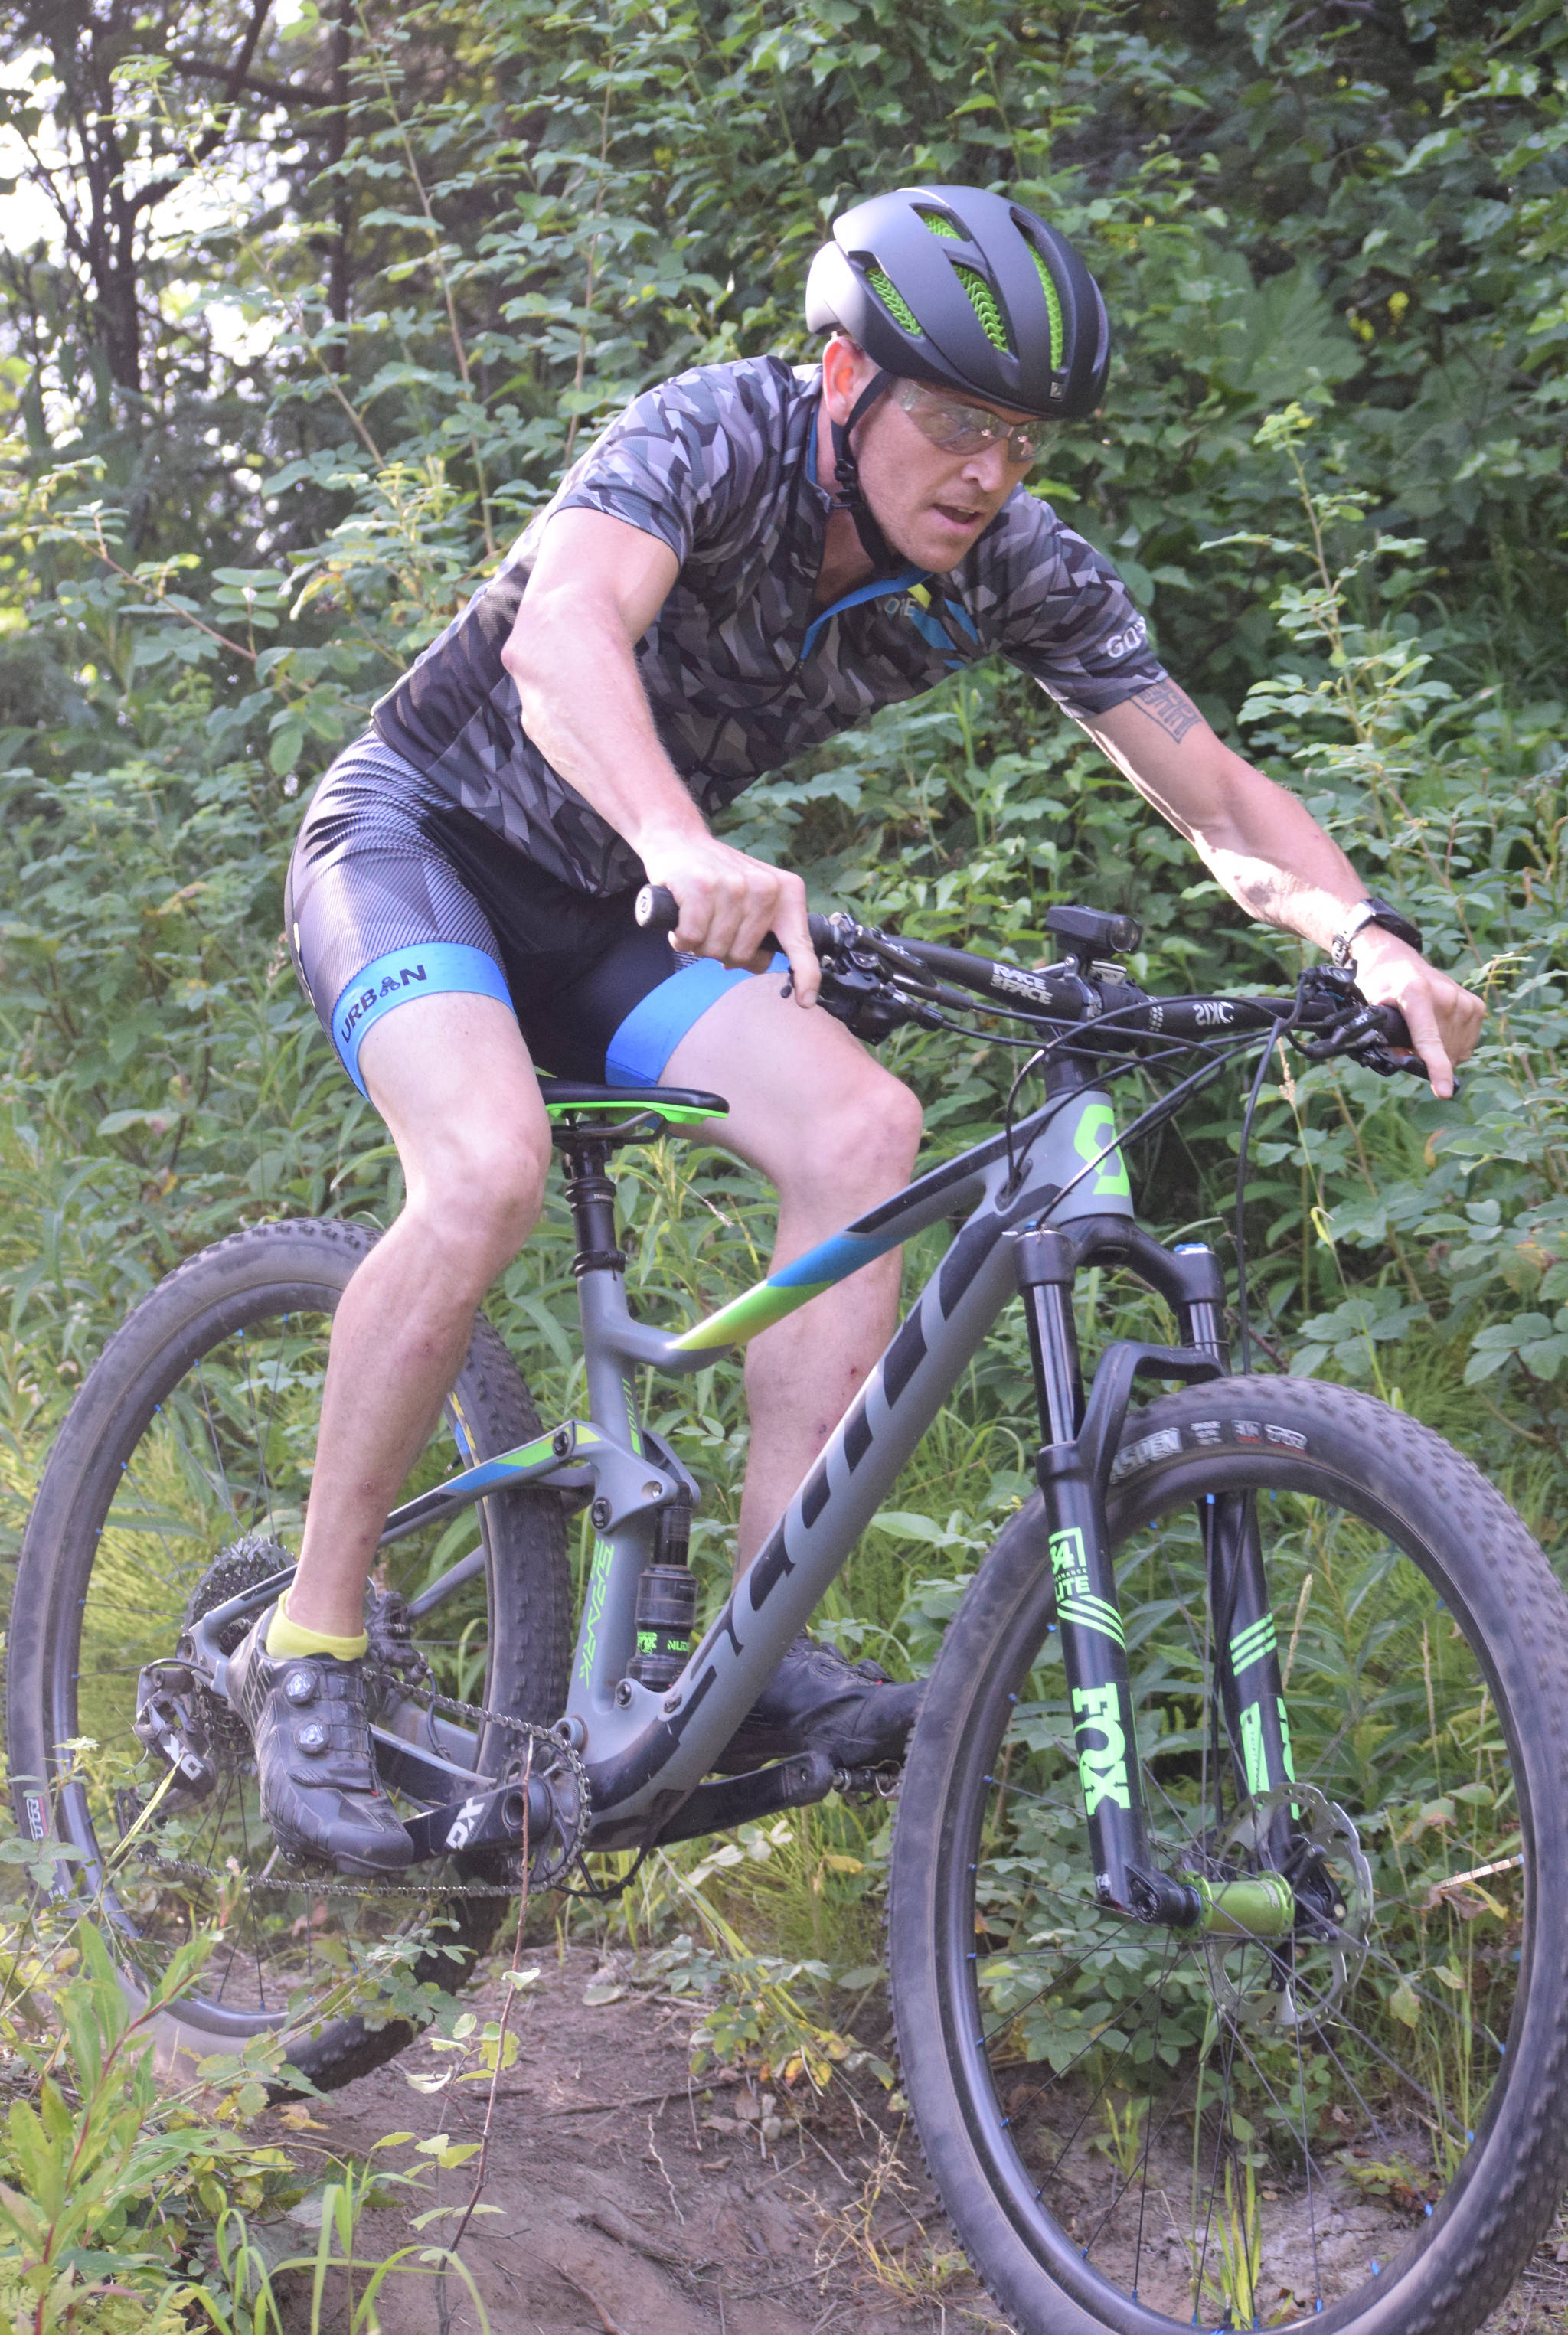 Mike Crawford negotiates a drop during Week 3 of the Soldotna Cycle Series on Thursday, July 18, 2019, at Tsalteshi Trails. (Photo by Jeff Helminiak/Peninsula Clarion)